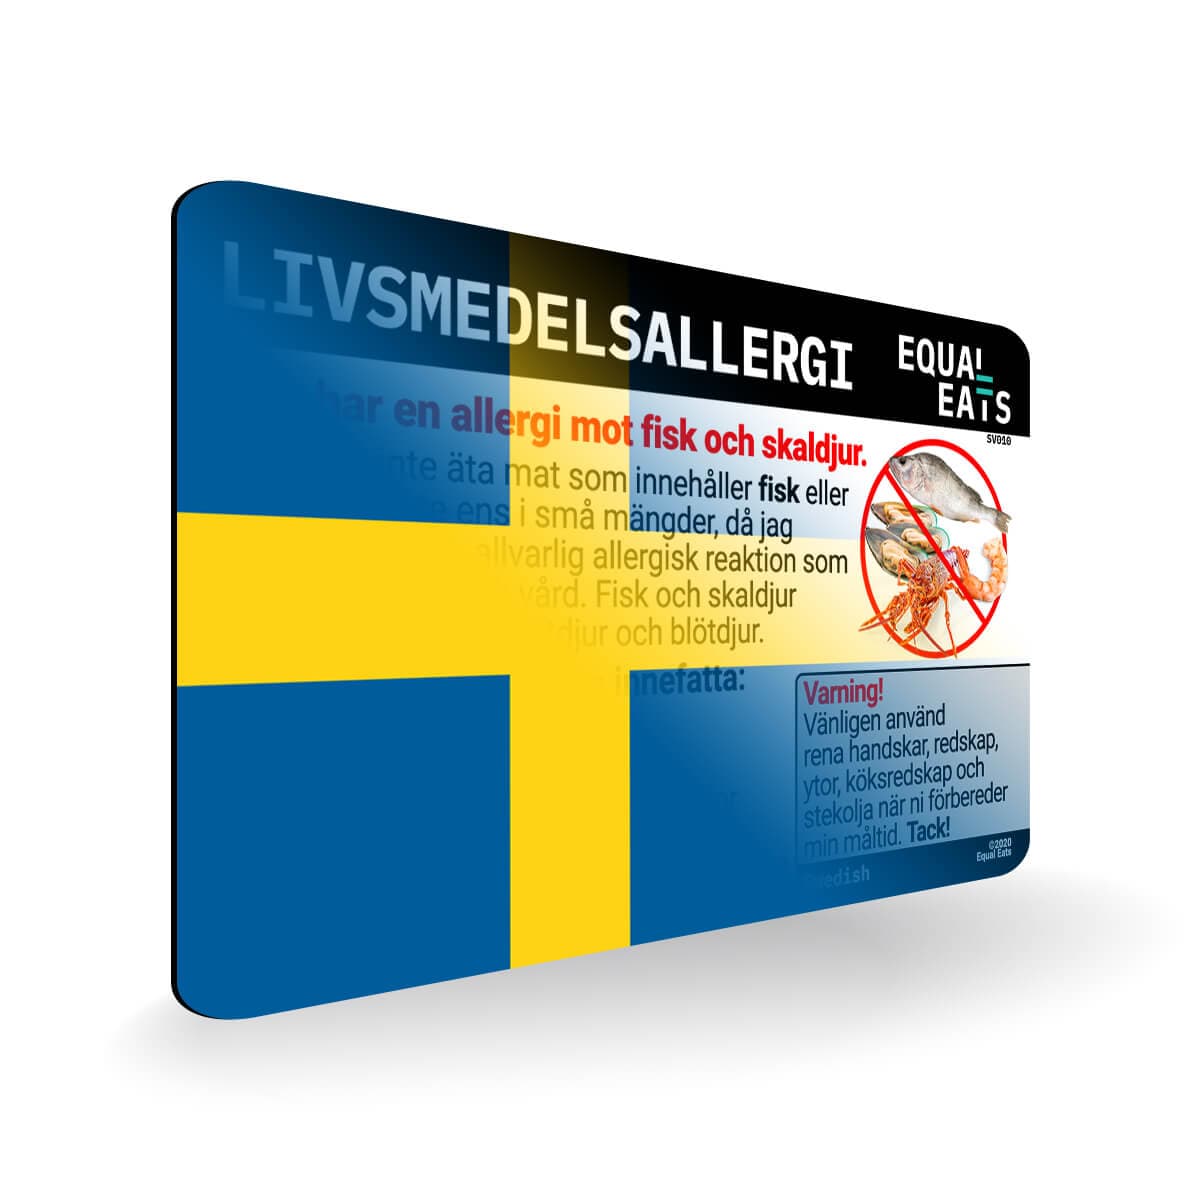 Seafood Allergy in Swedish. Seafood Allergy Card for Sweden